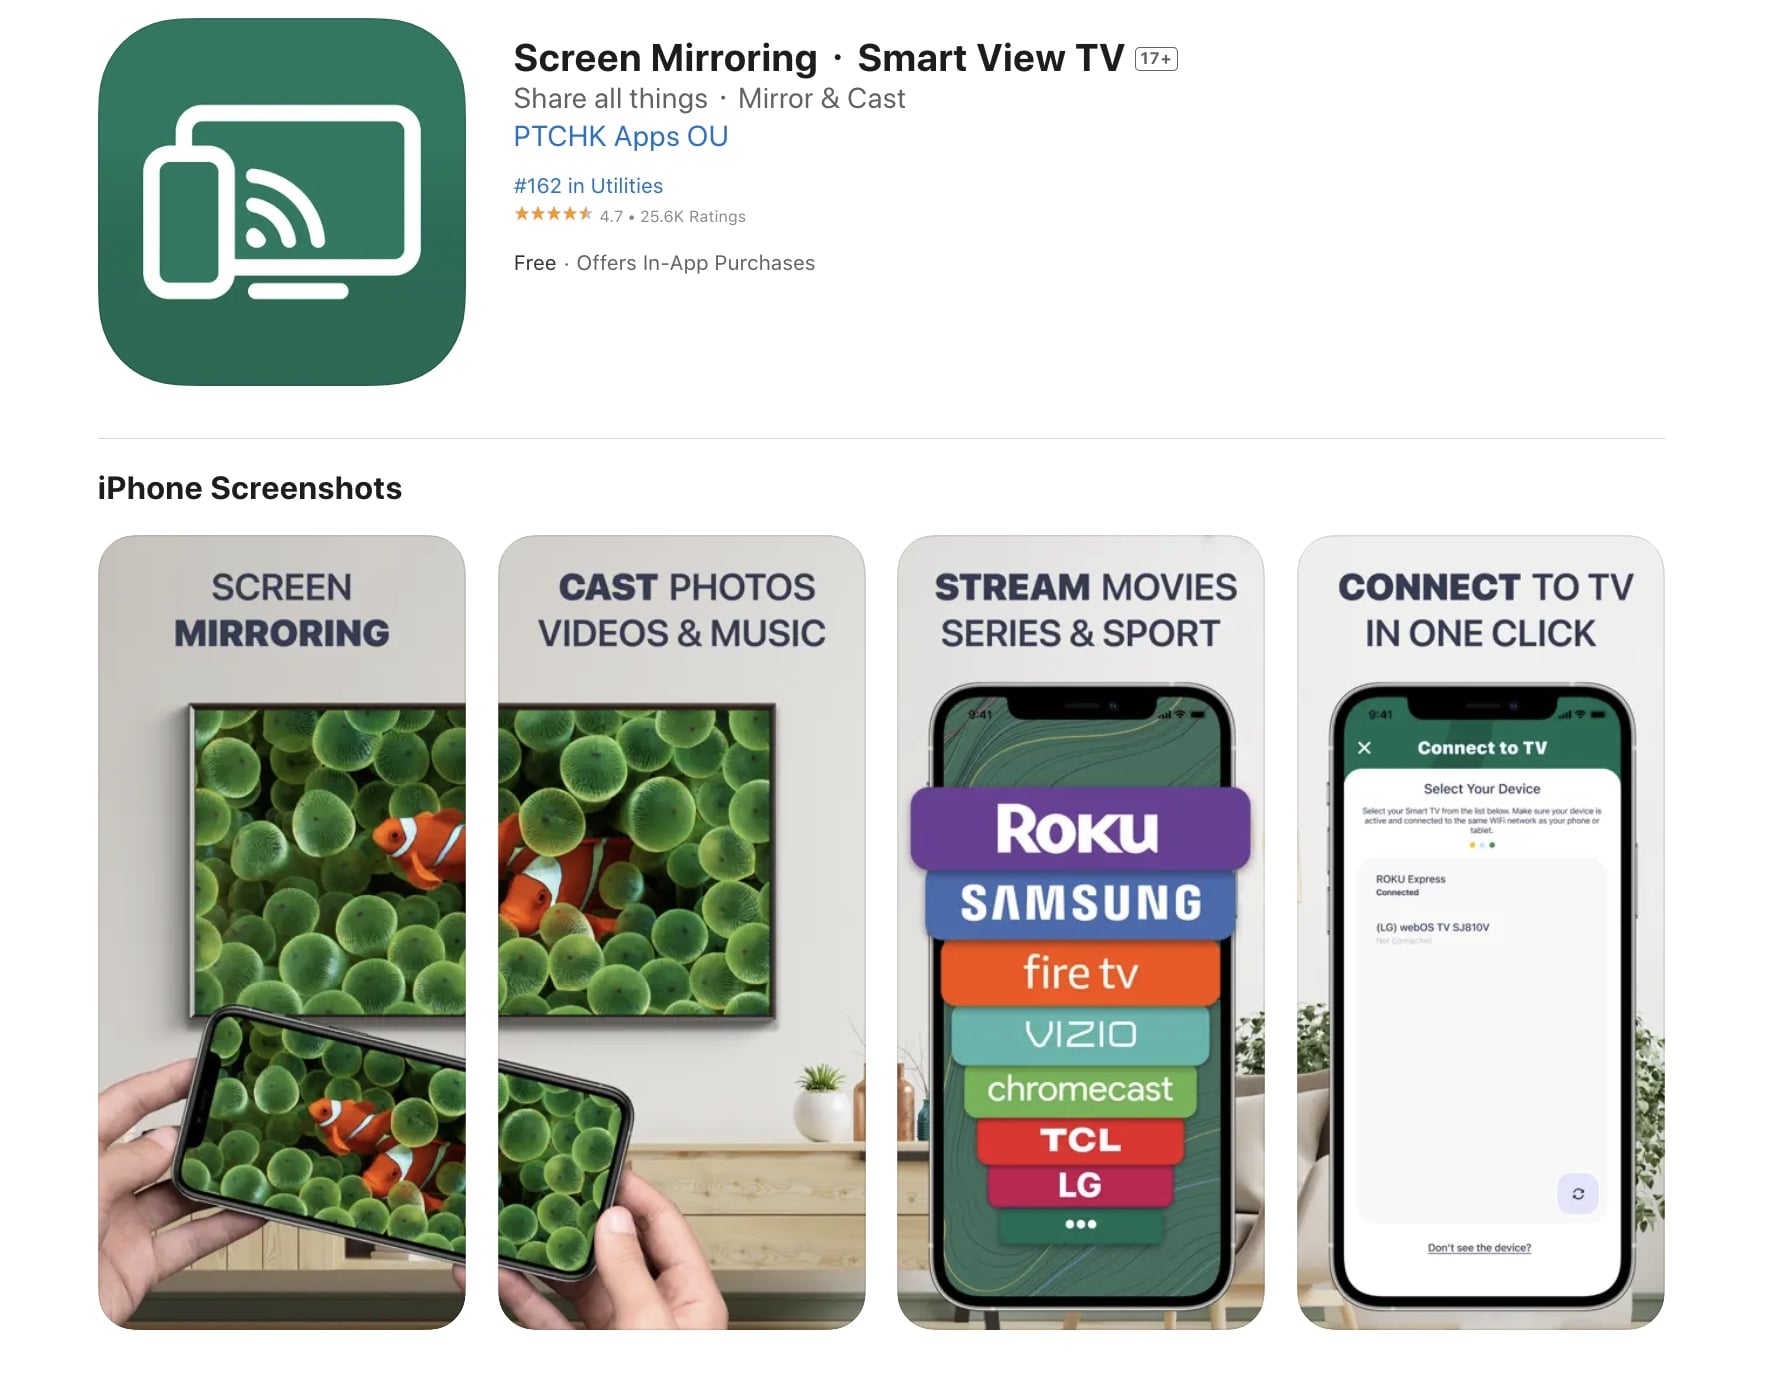 The Screen Mirroring・Smart View TV app in the App Store